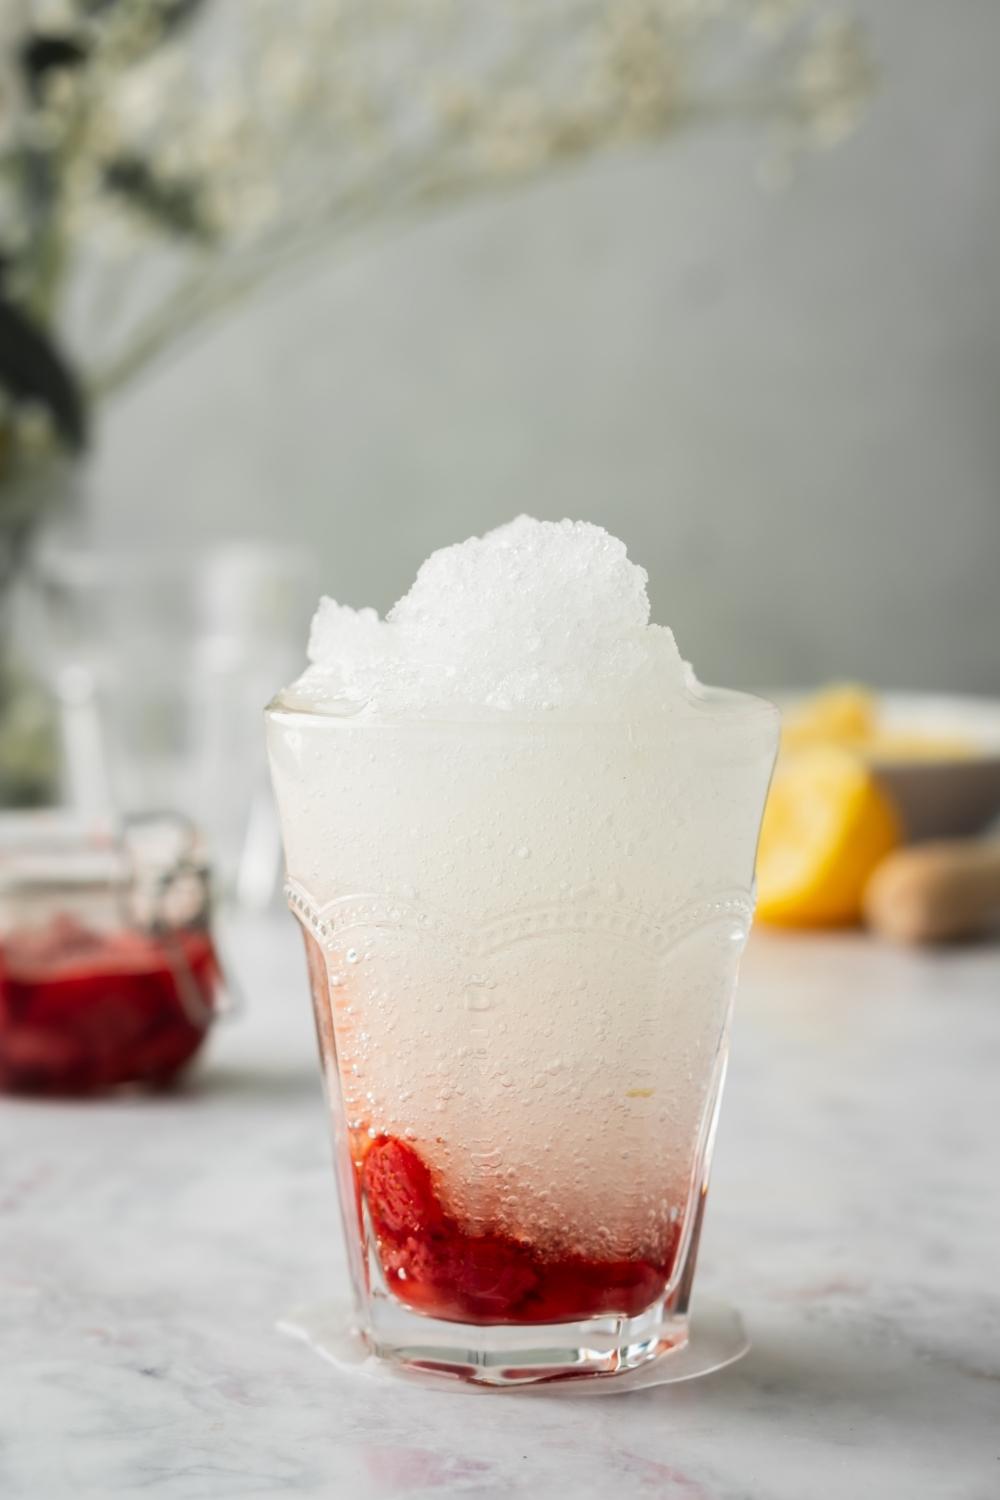 A finished strawberry slushie in a glass, with the ingredients to make the slushie behind the glass.